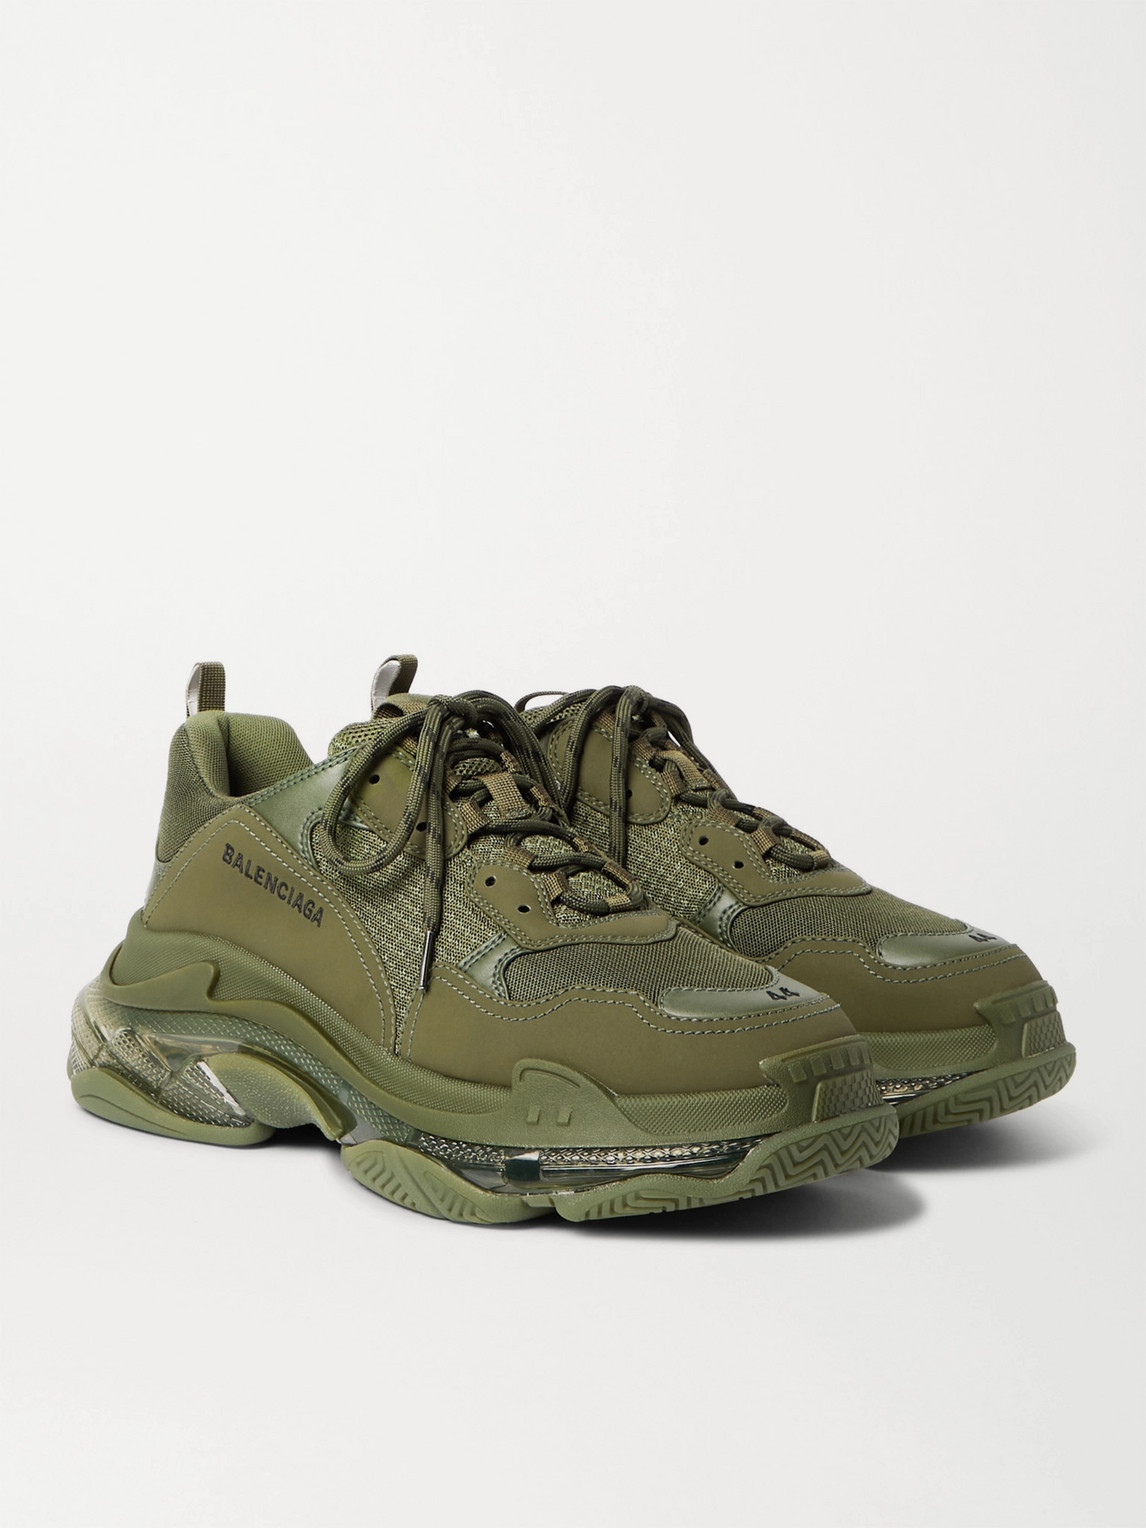 BALENCIAGA TRIPLE S CLEAR SOLE MESH, NUBUCK AND LEATHER SNEAKERS